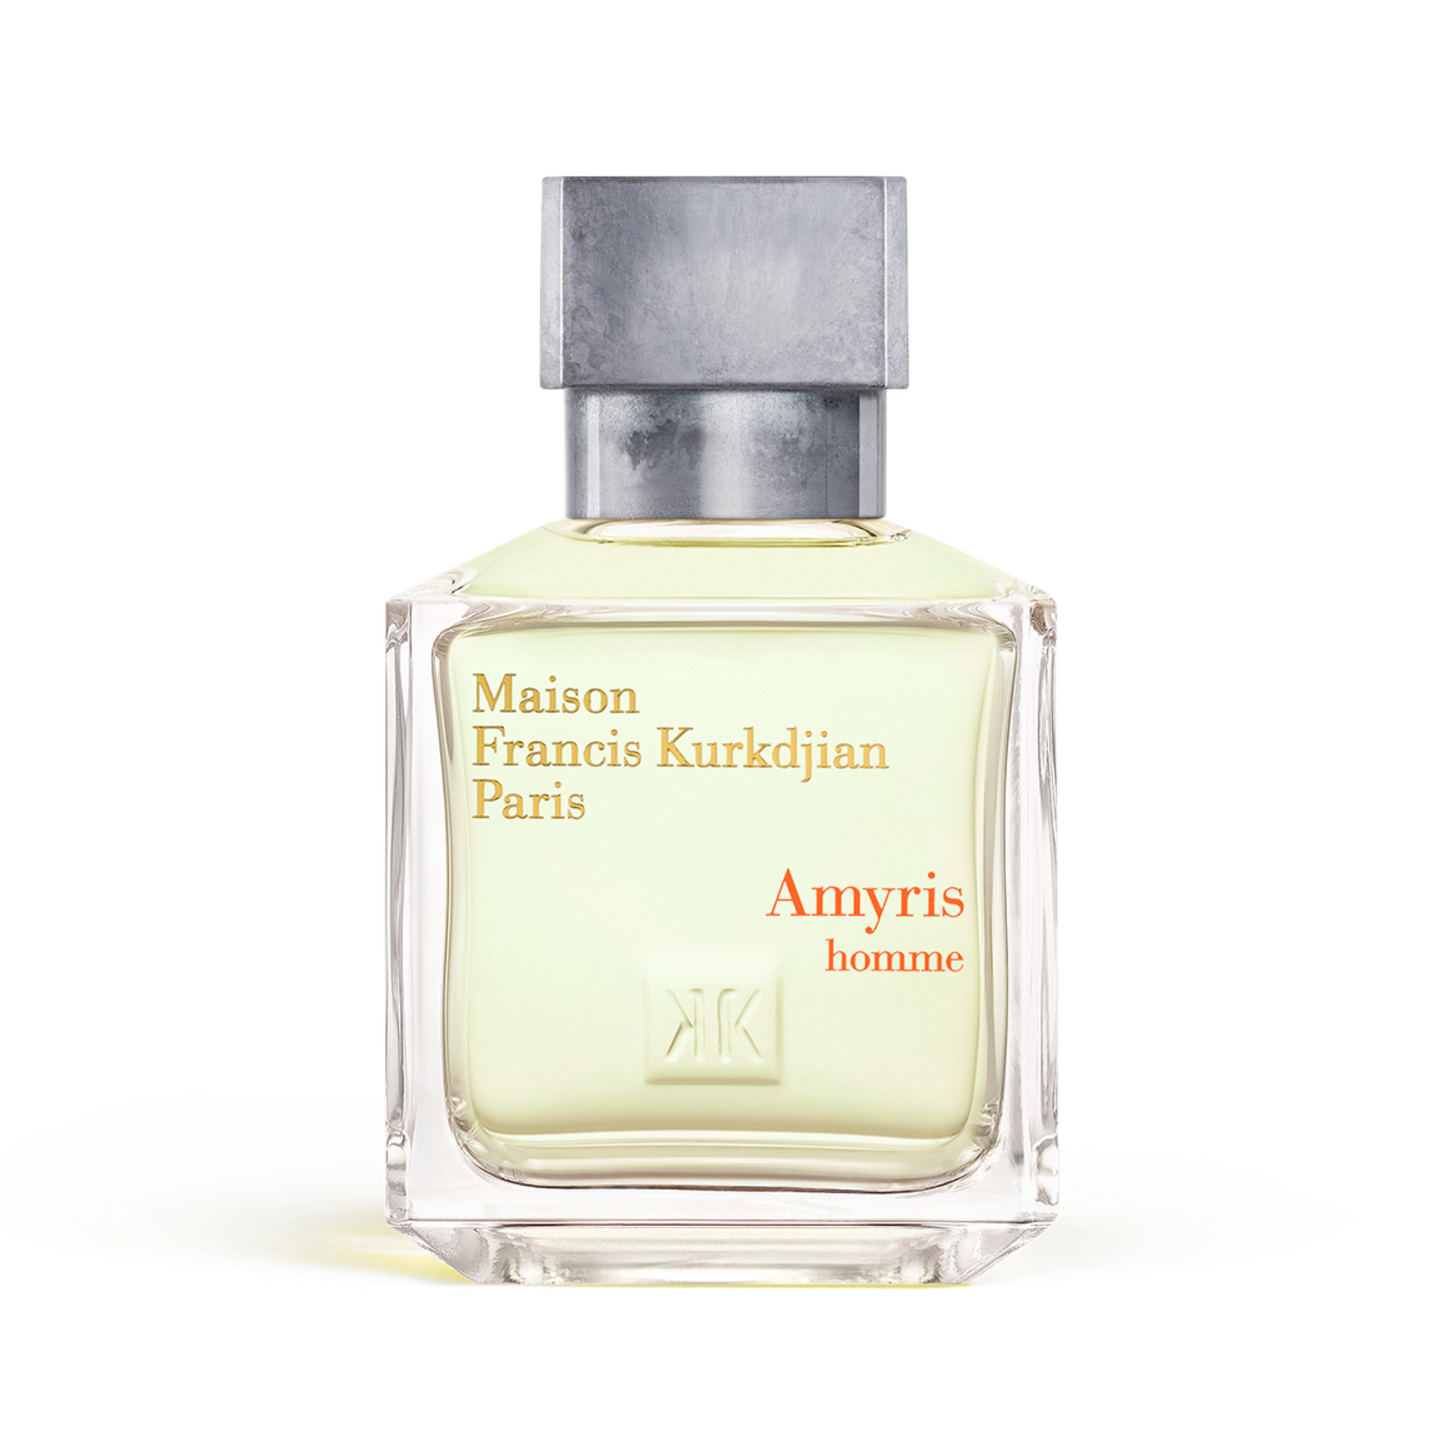 Primary image of Amyris Homme EDT